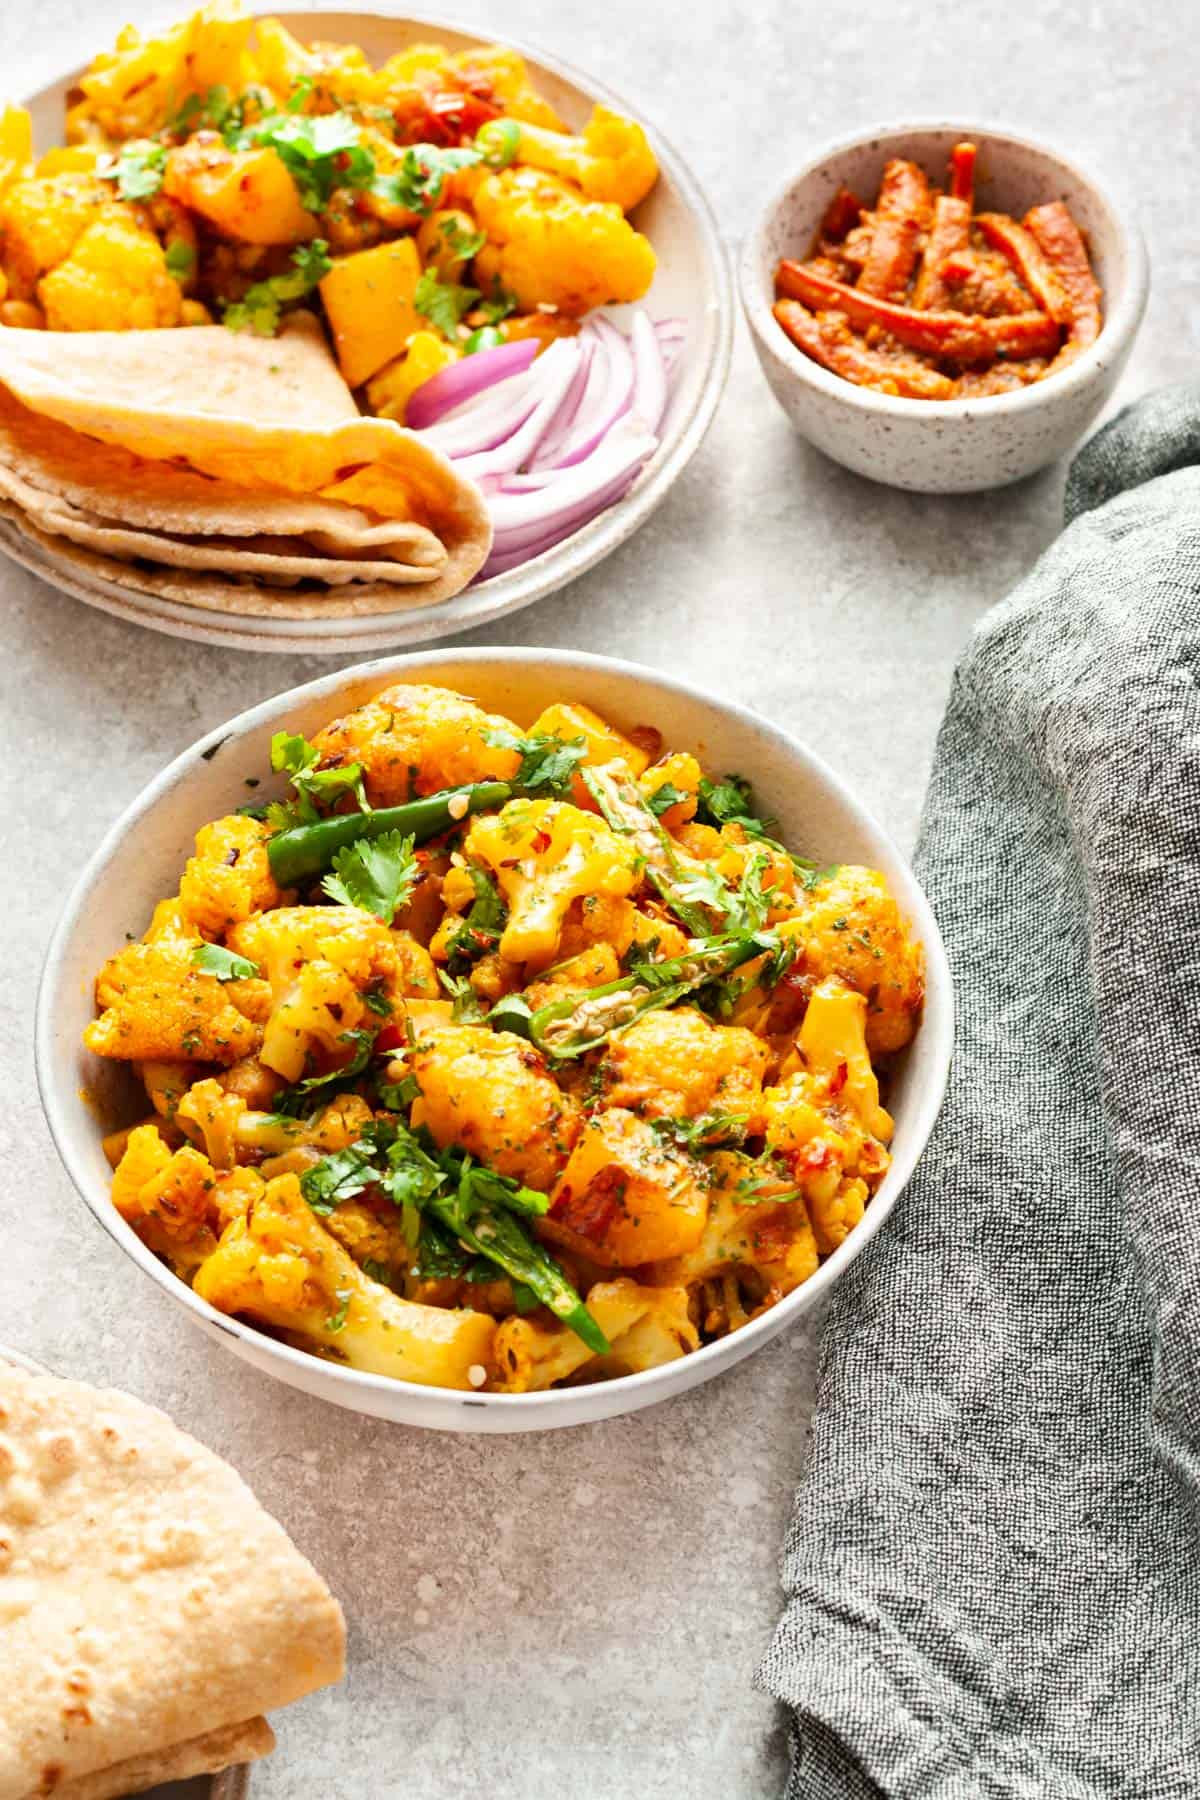 Aloo Gobi in bowl with roti and Indian pickles (achar) in small bowl.